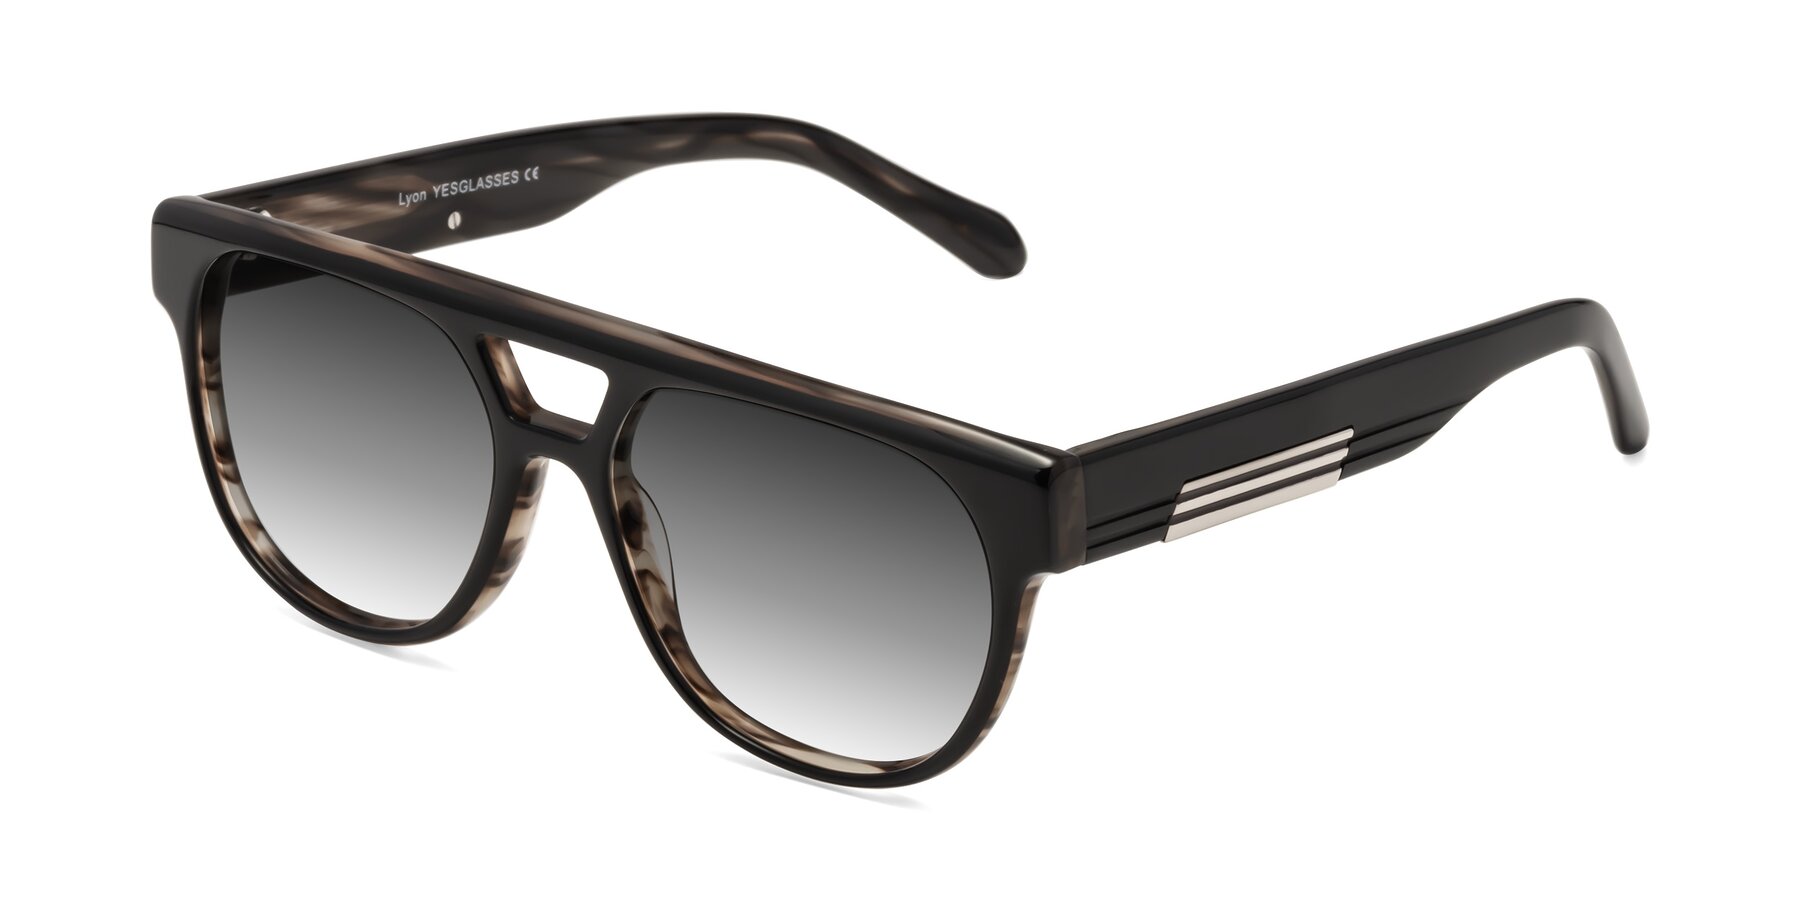 Angle of Lyon in Black-Brown with Gray Gradient Lenses